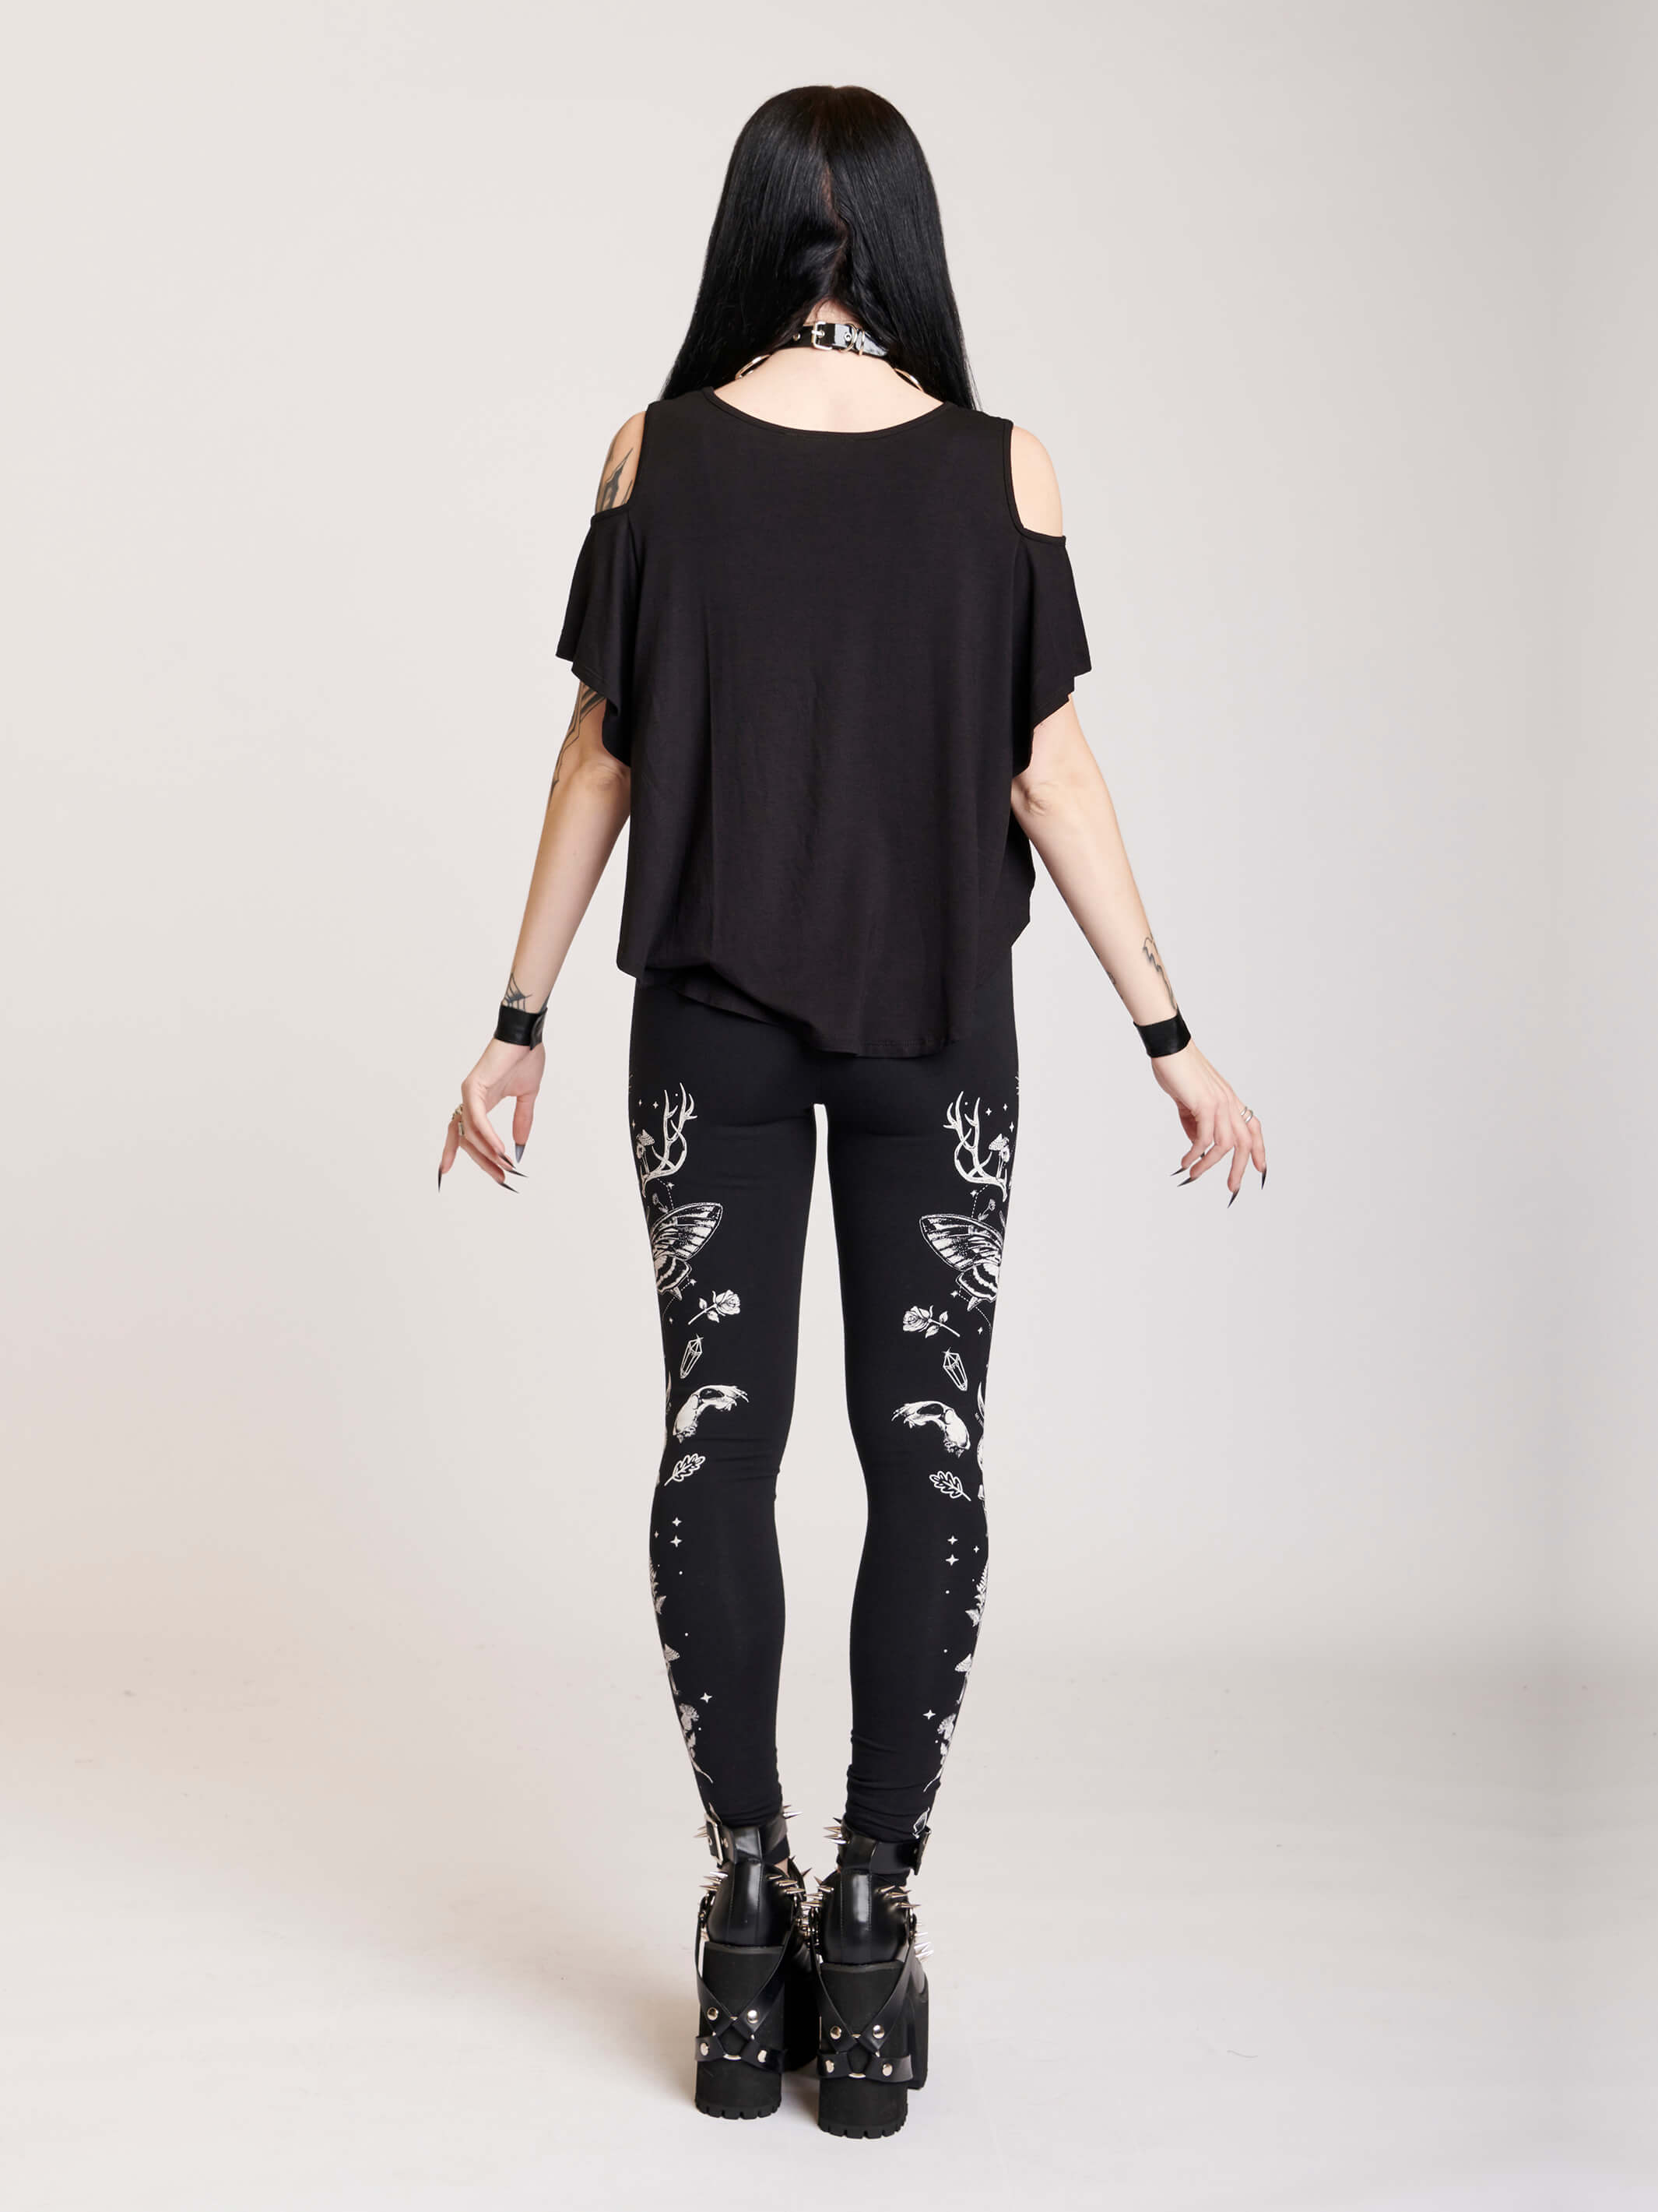 Black legging with death moth and forest findings graphics down sides